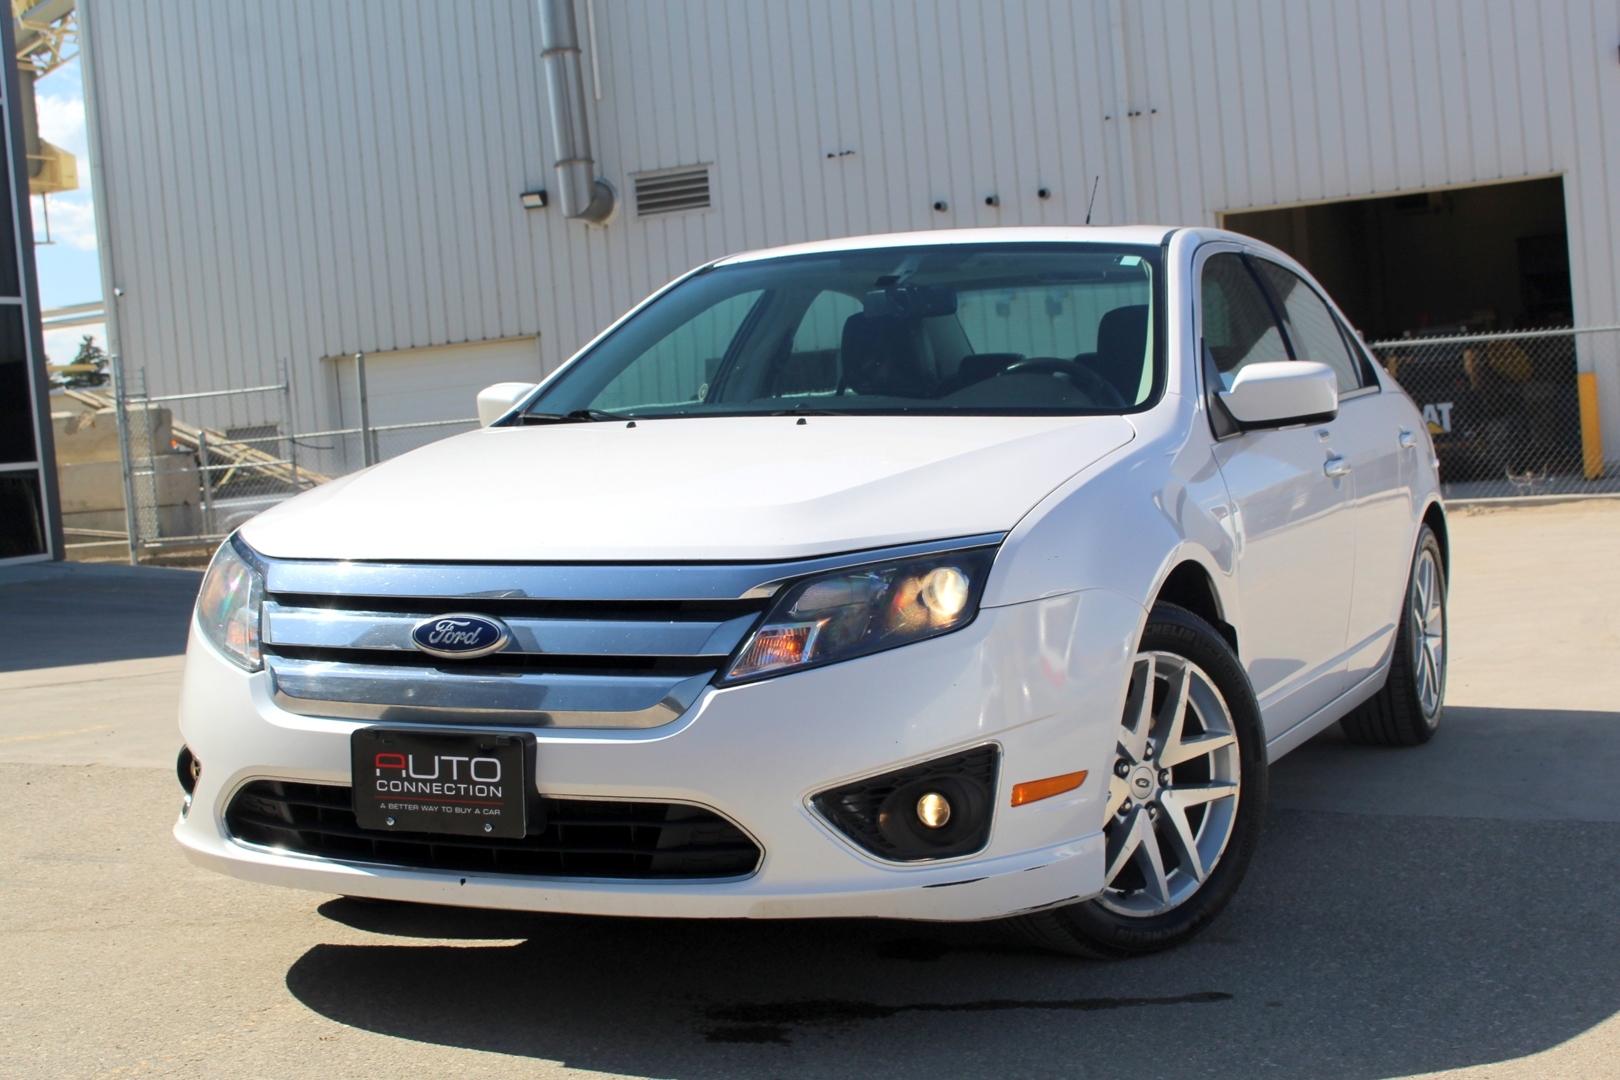 2010 Ford Fusion SEL - AWD - MOONROOF - LEATHER - SONY AUDIO